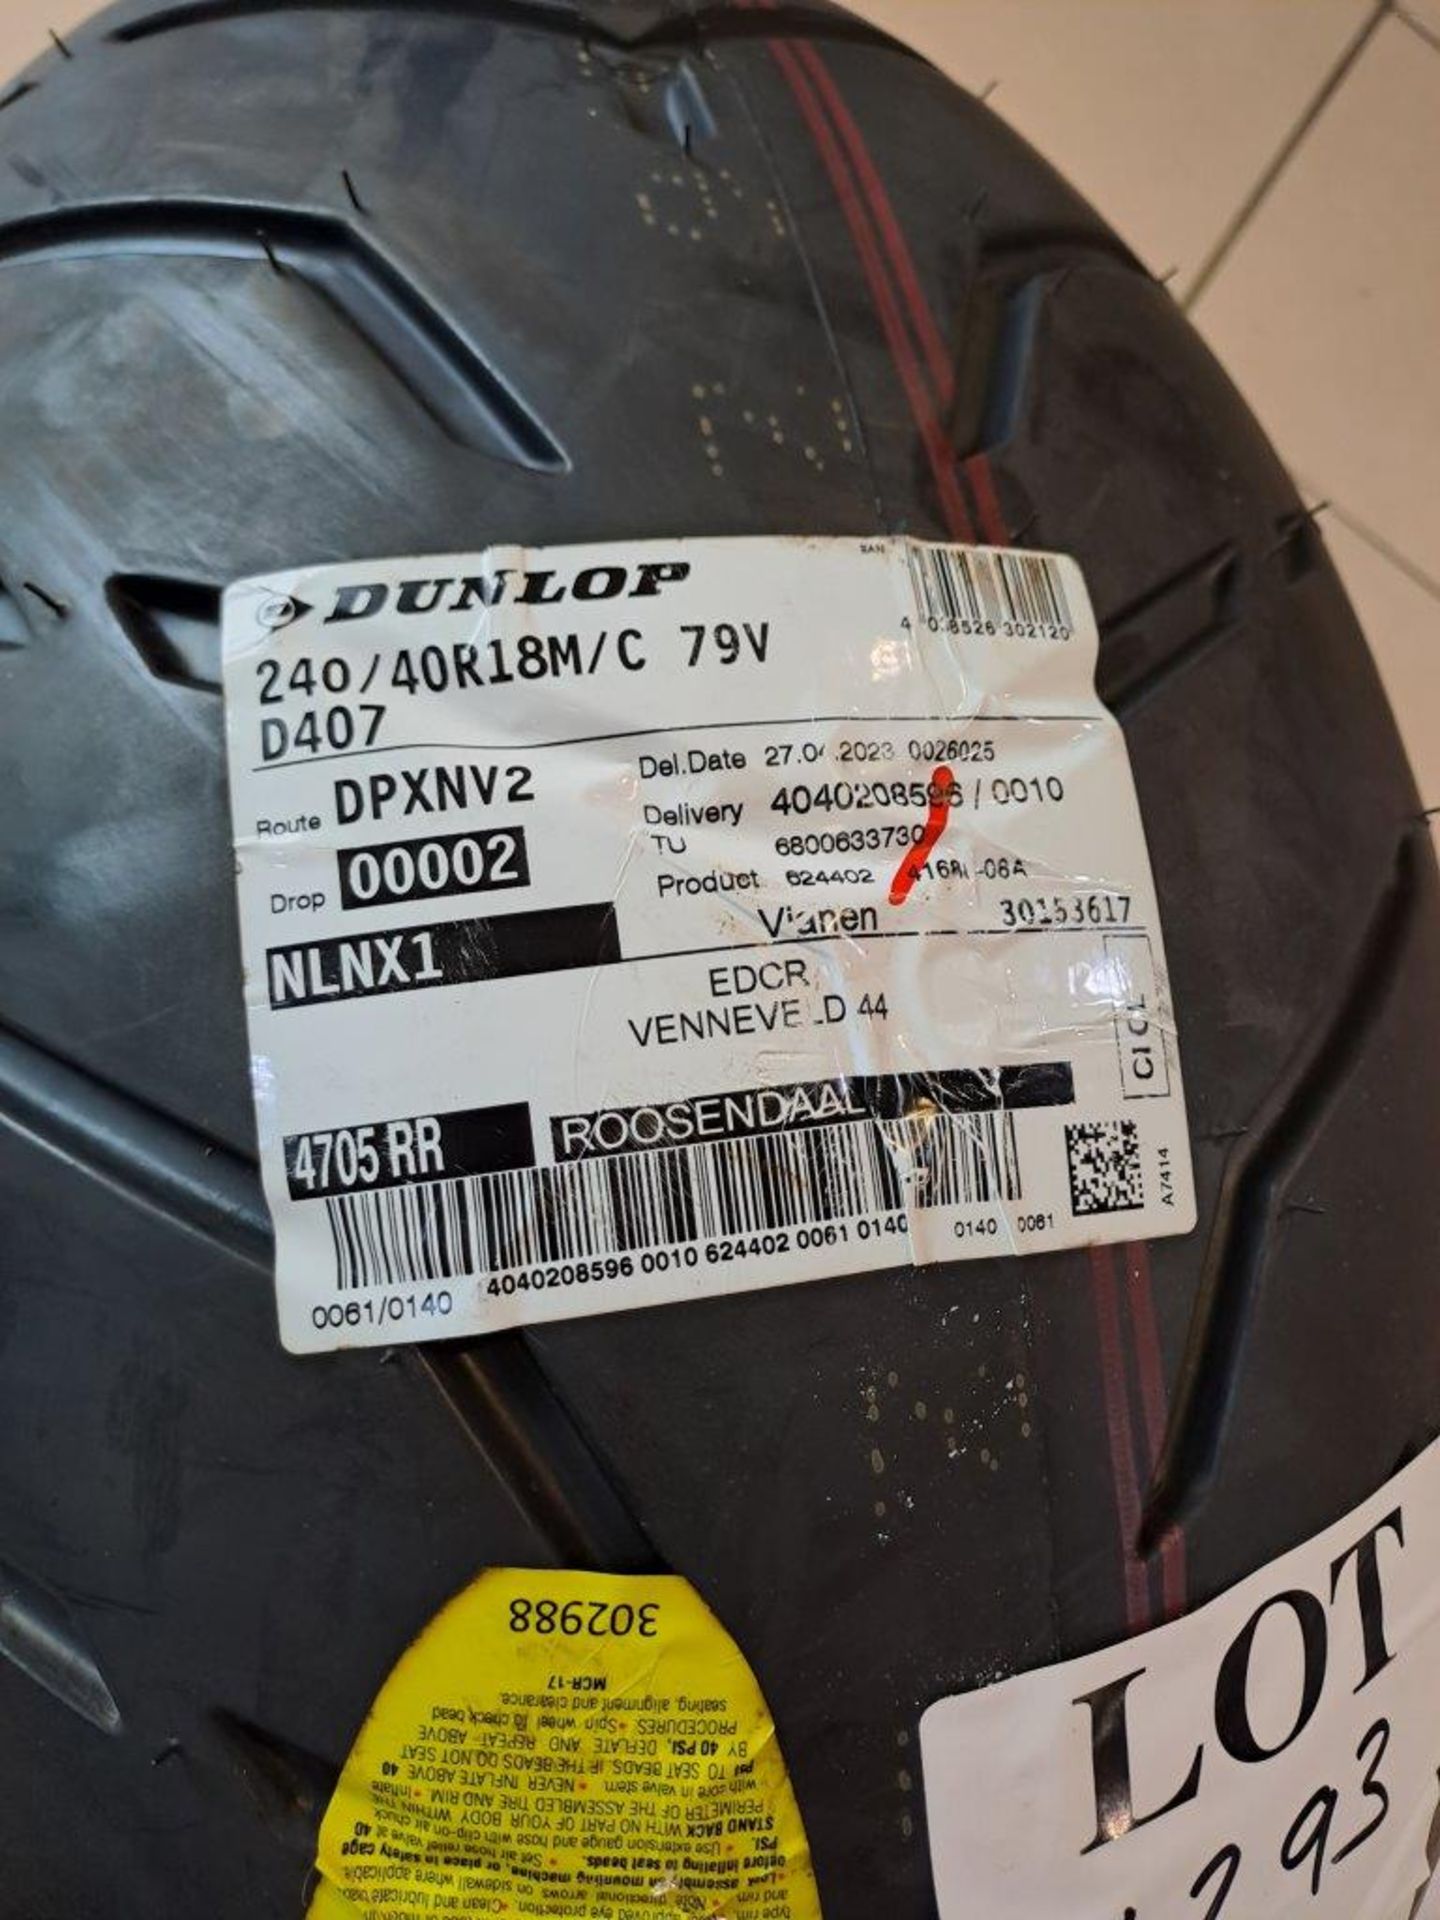 Dunlop DT407 240/40-R18 Tyre - Image 3 of 5